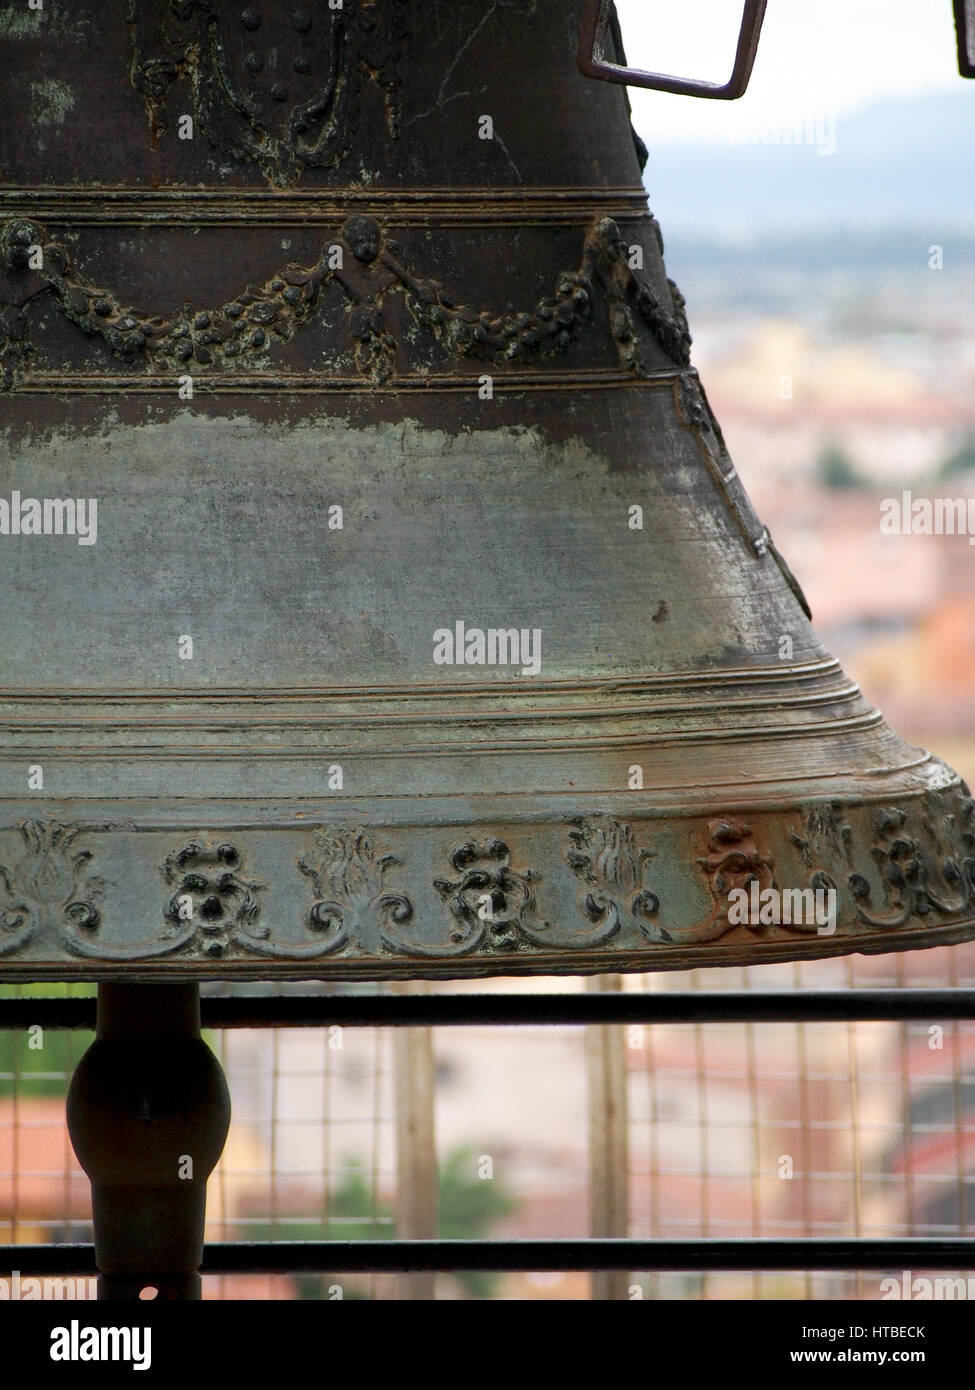 A detail of a large bell in the bell tower of the Leaning Tower of Pisa in Italy. Stock Photo